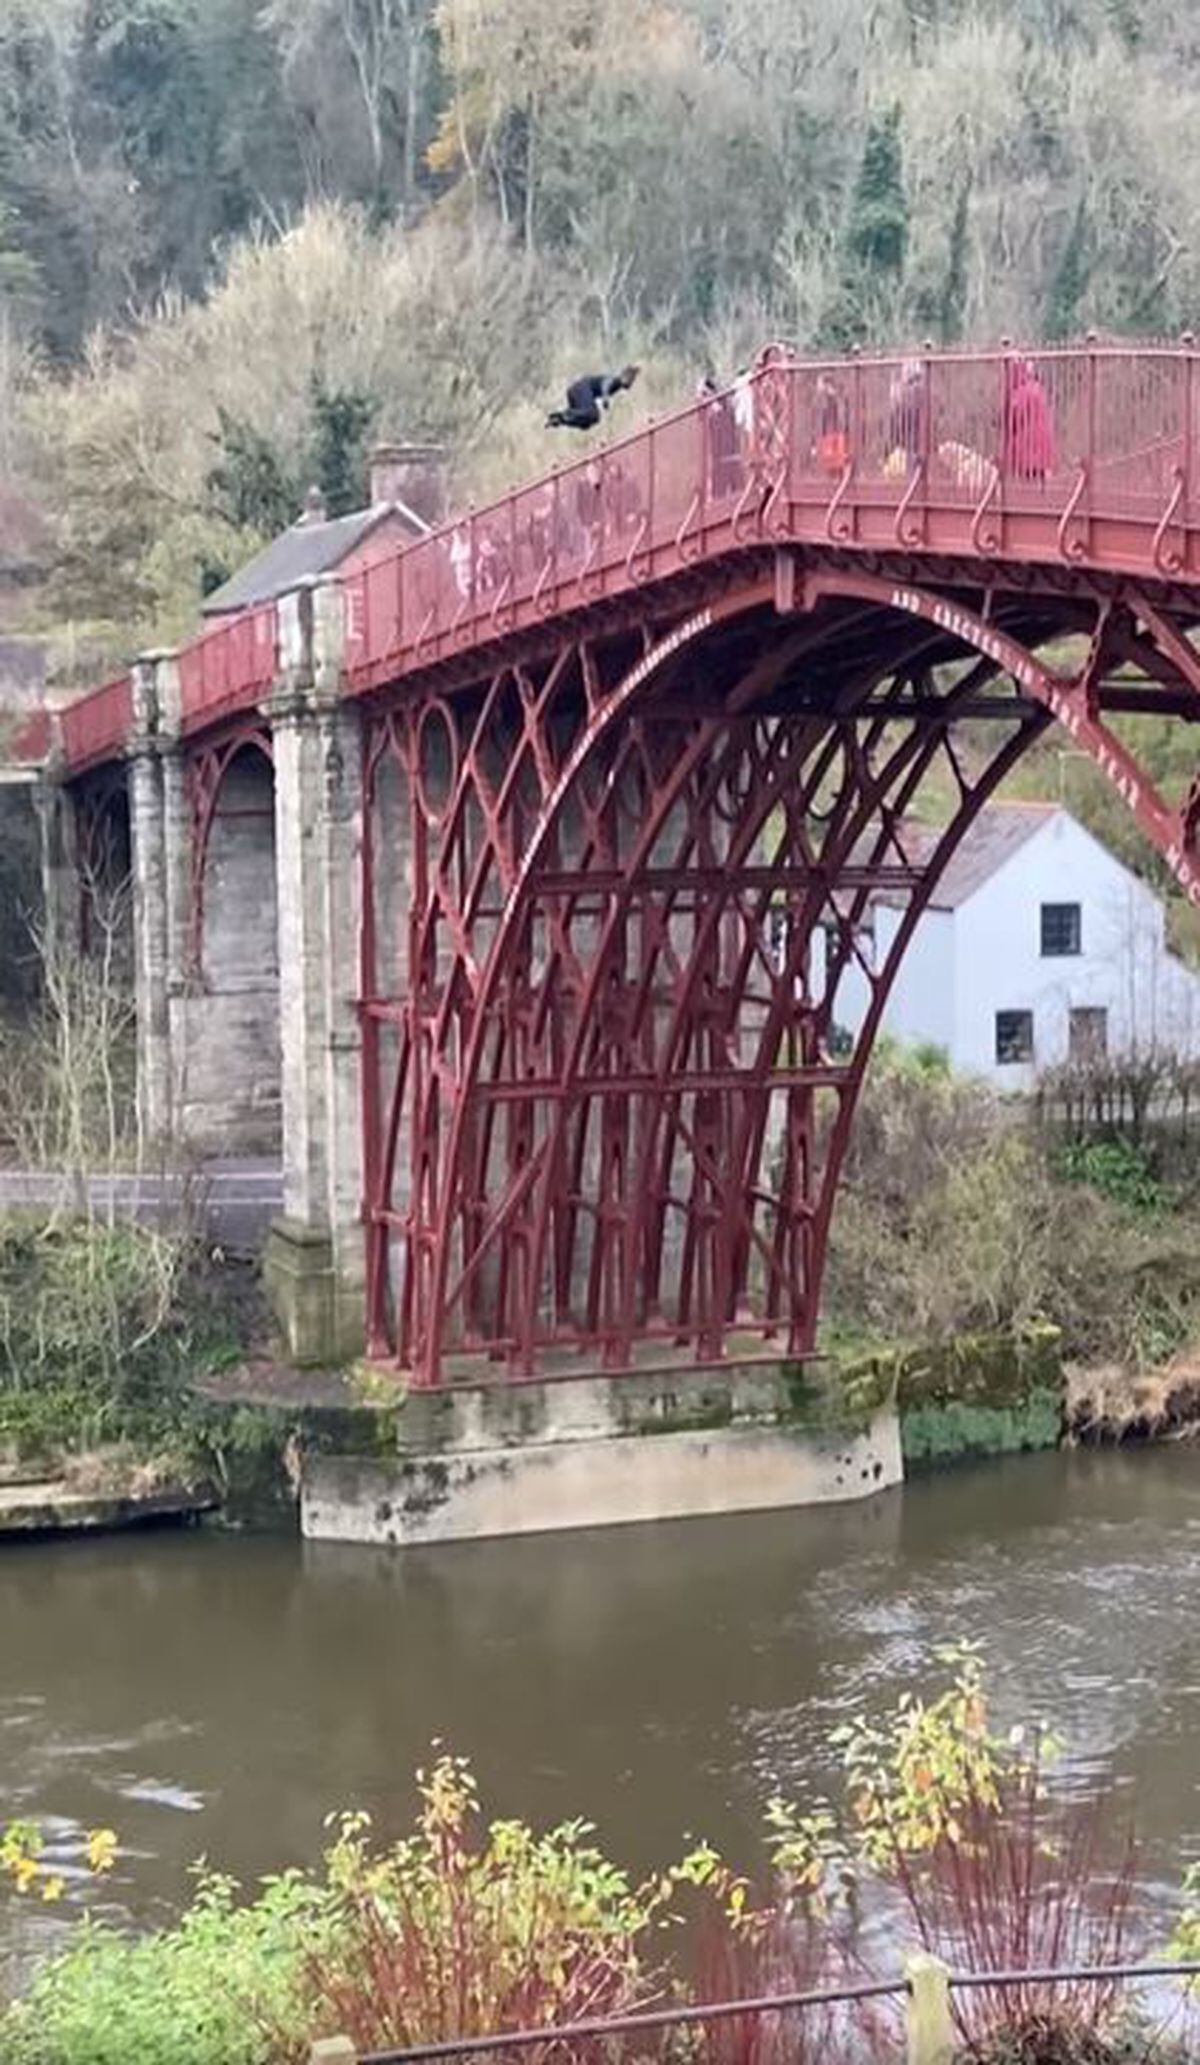 A person was seen jumping from the historic Iron Bridge over the weekend.